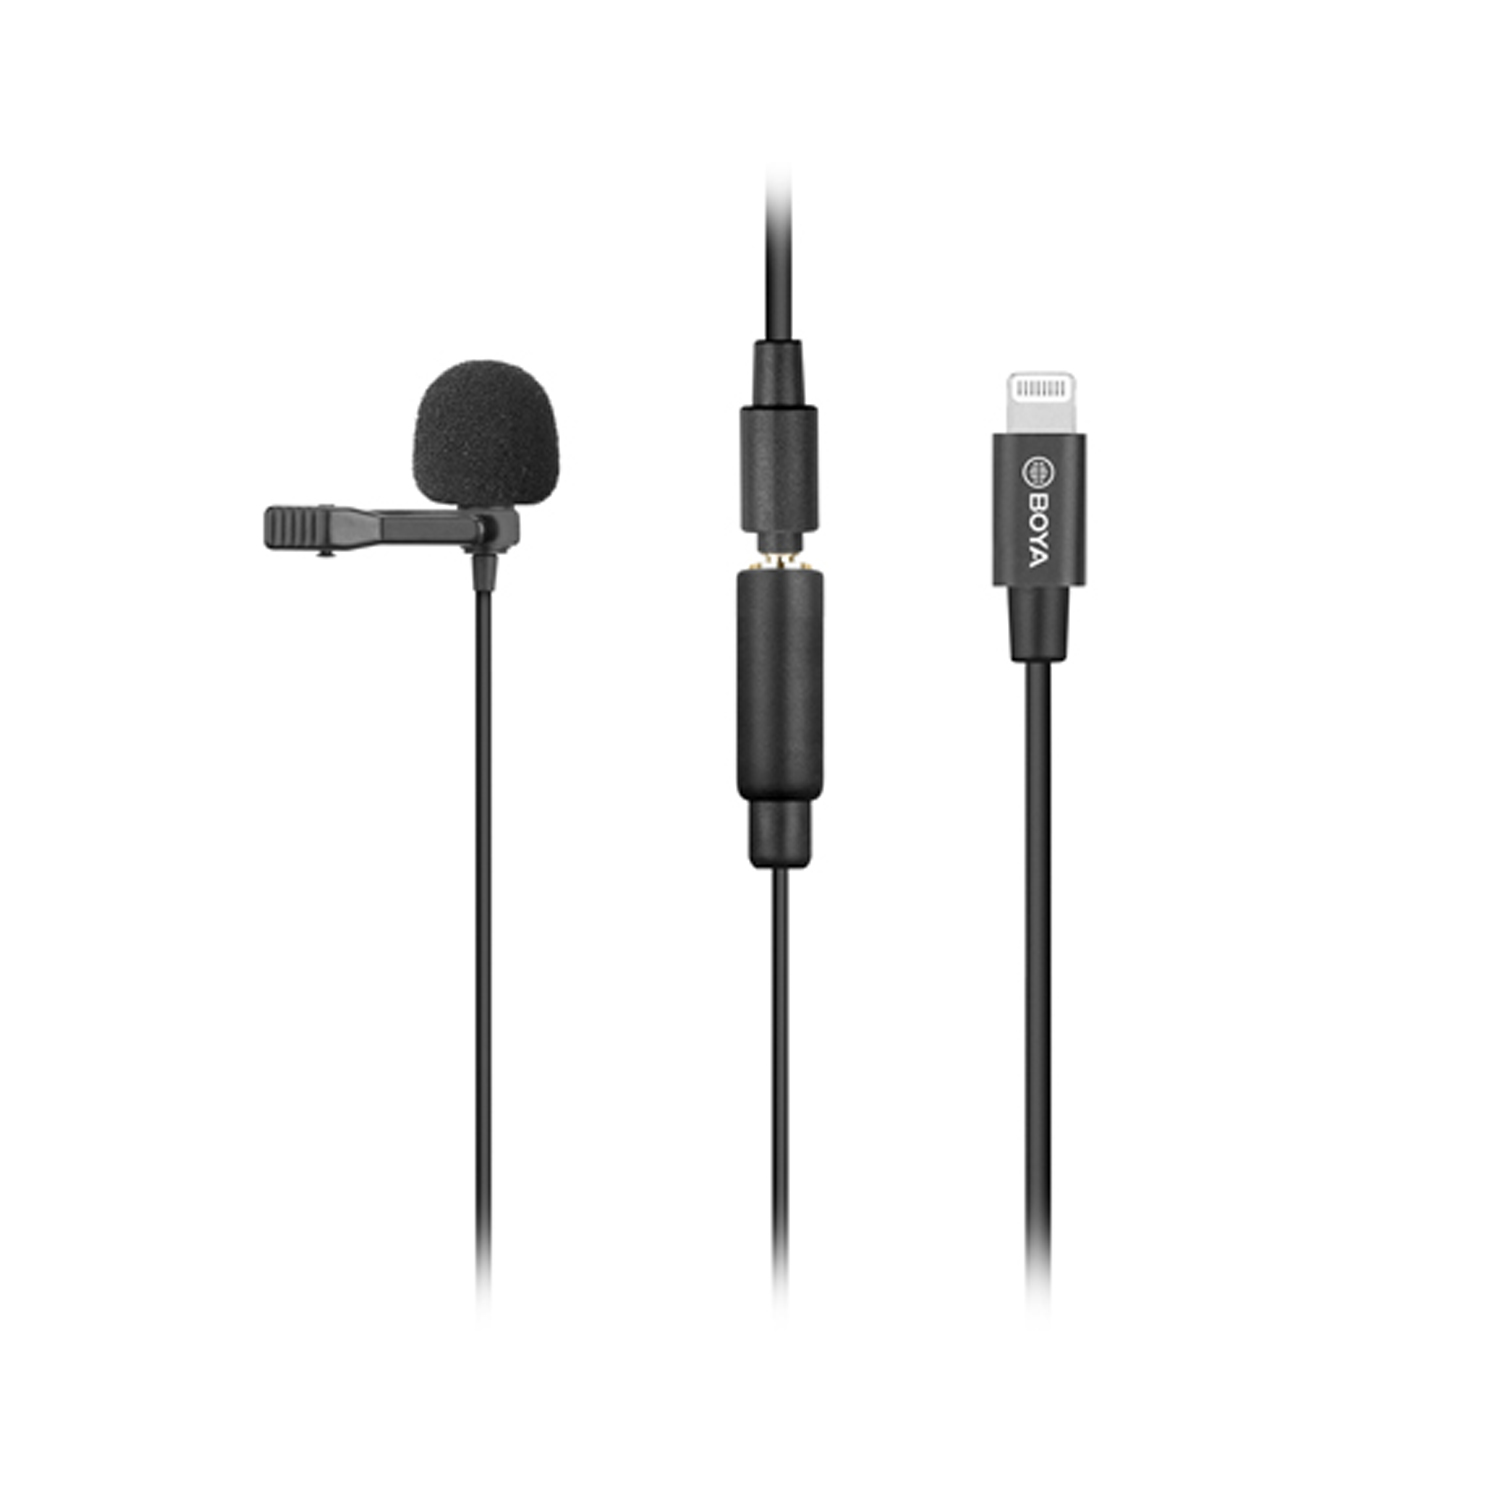 BY-M2 Clip-on Lavalier Microphone for iOS devices